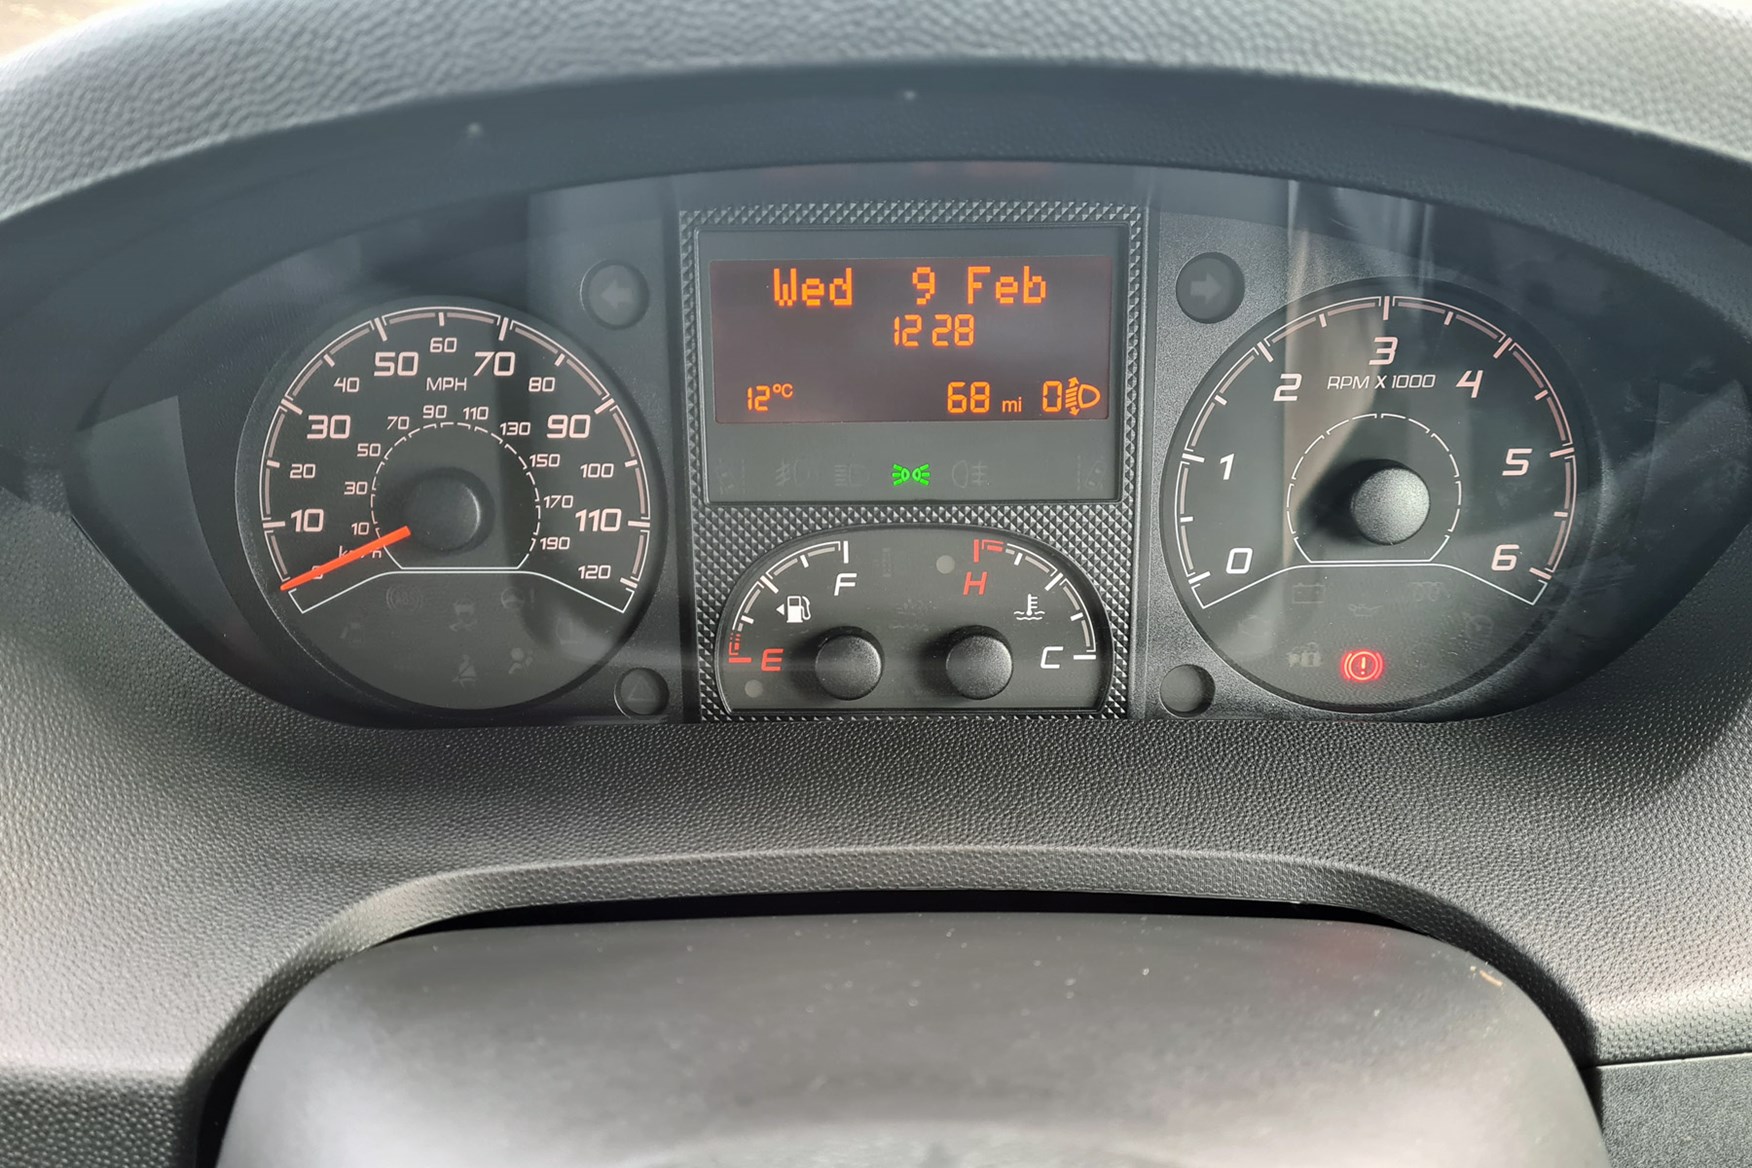 Peugeot e-Boxer electric van review - instrument clusters with needles missing